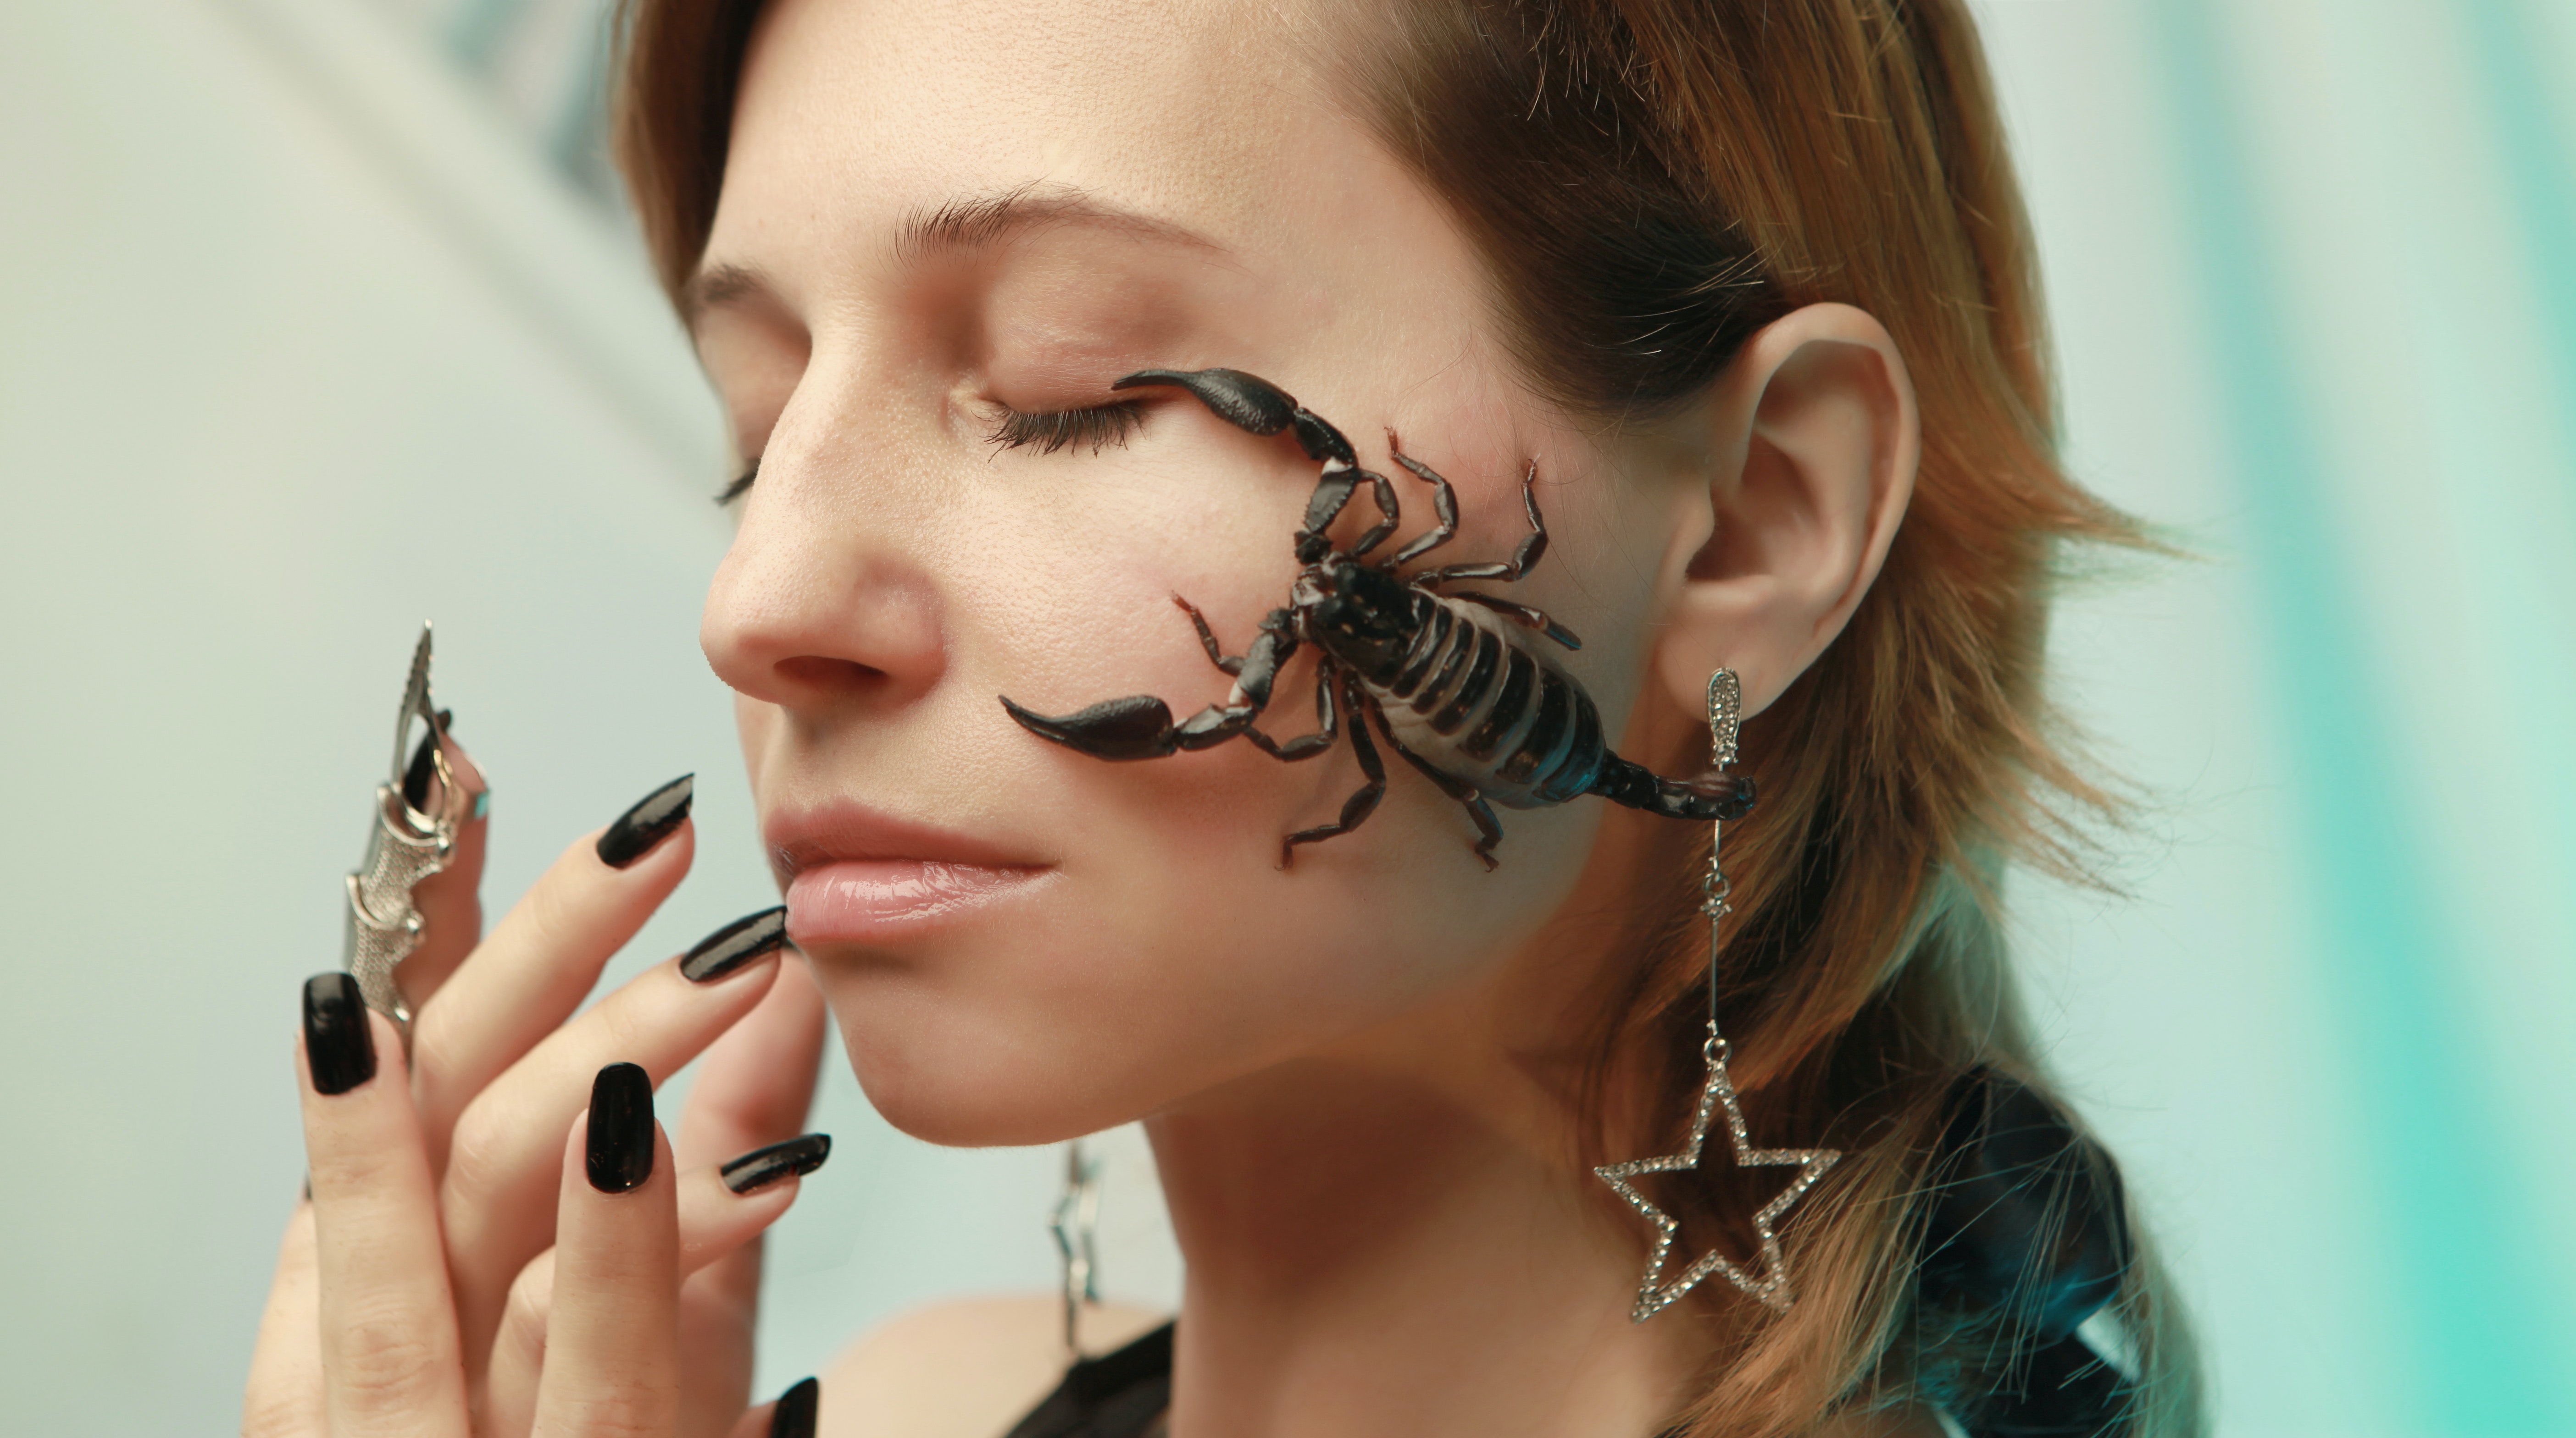 A woman with a Scorpion on her face. | Source: Pexels